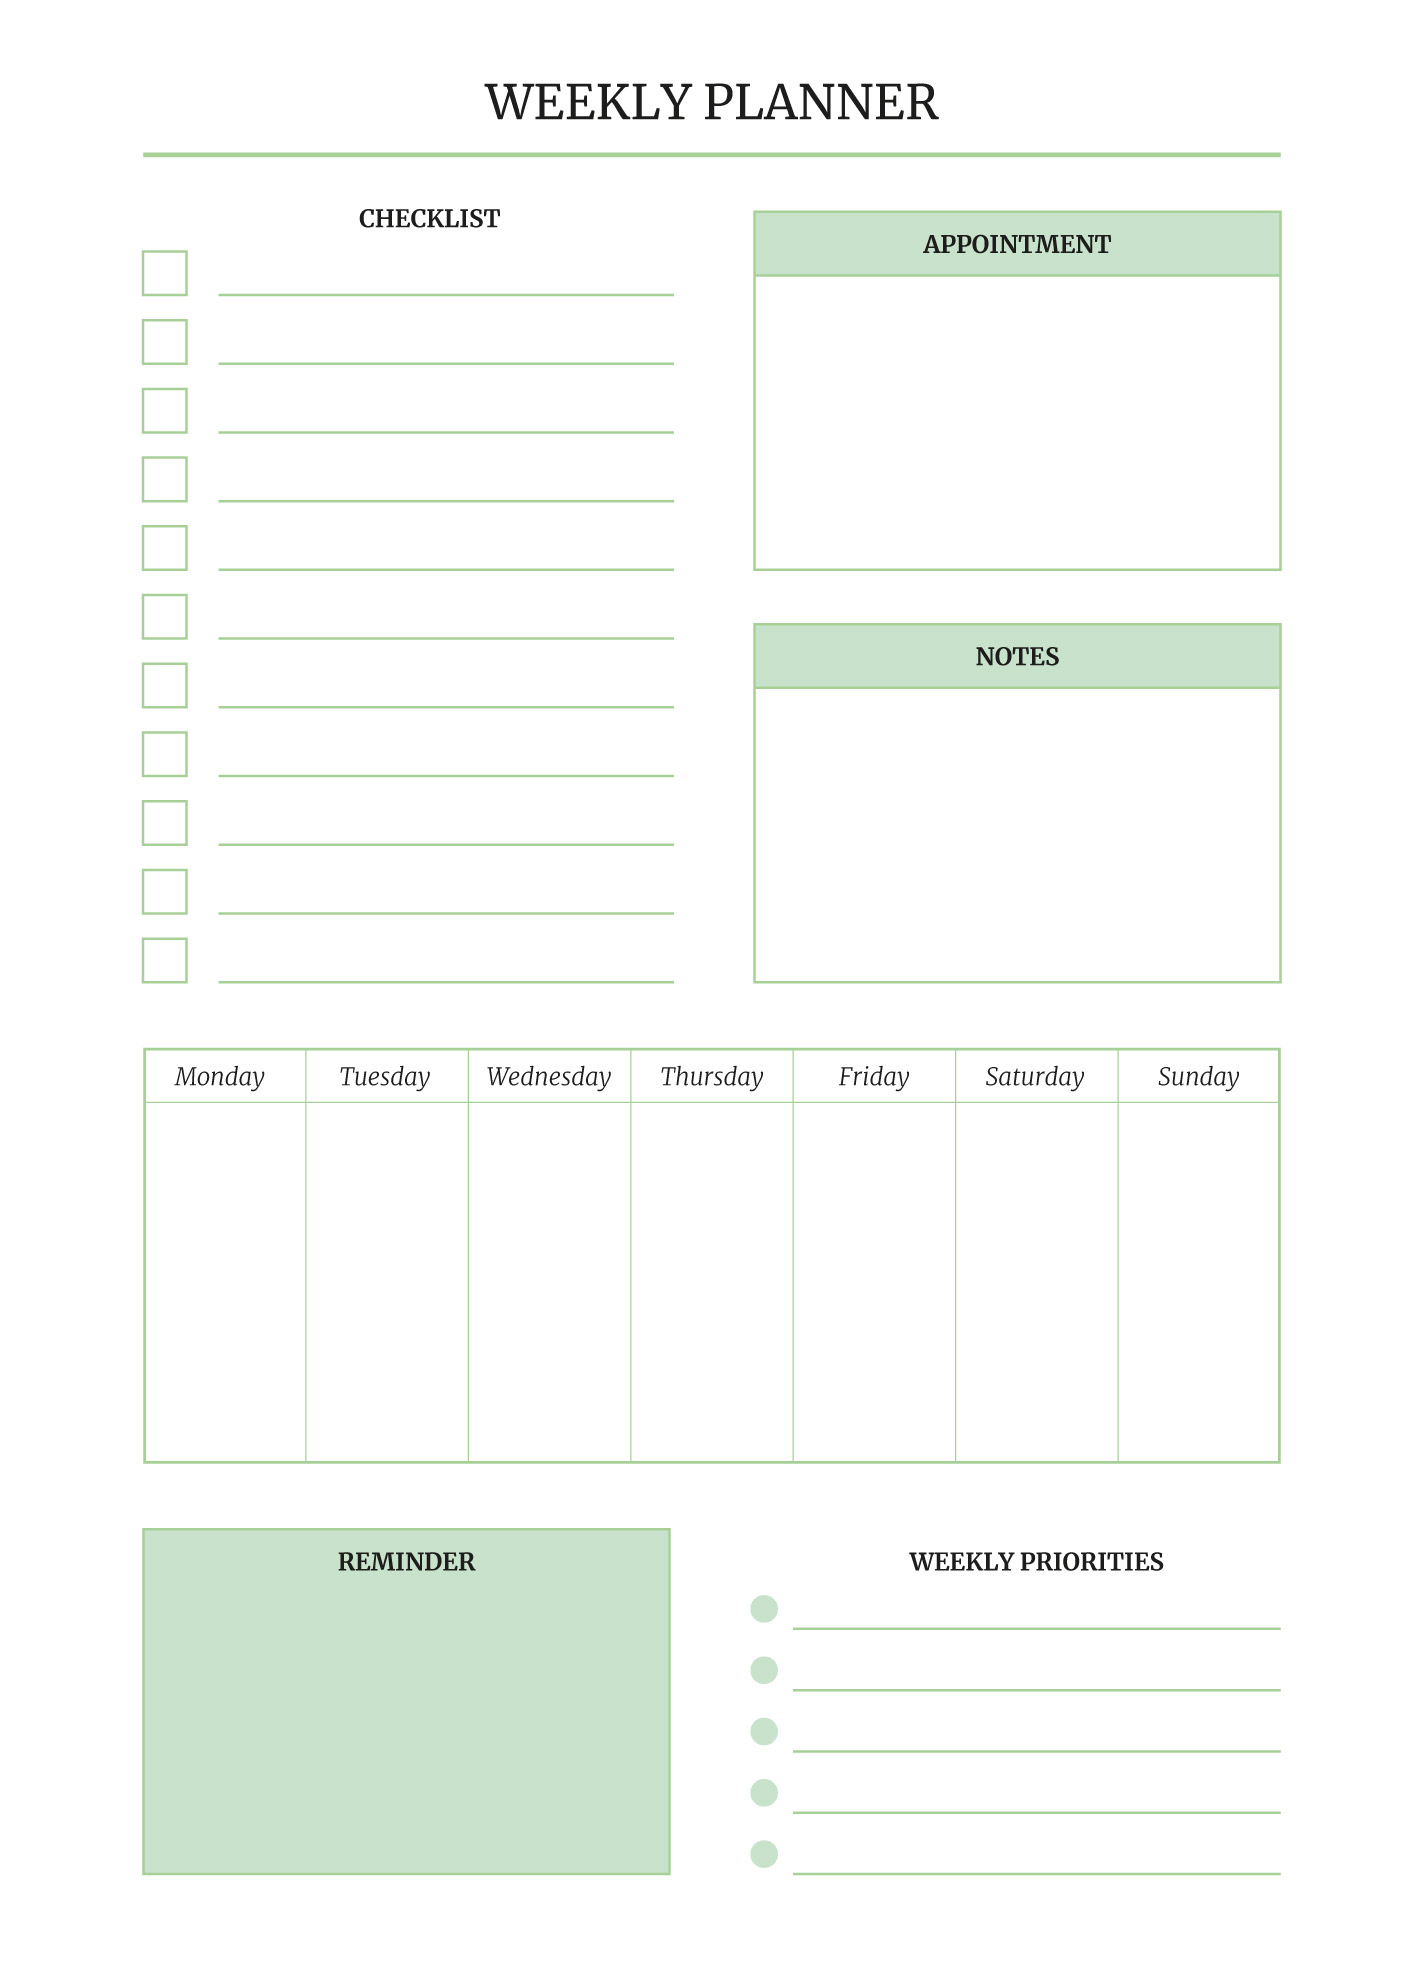 Free Daily Journal Templates In Google Docs, Google Sheets